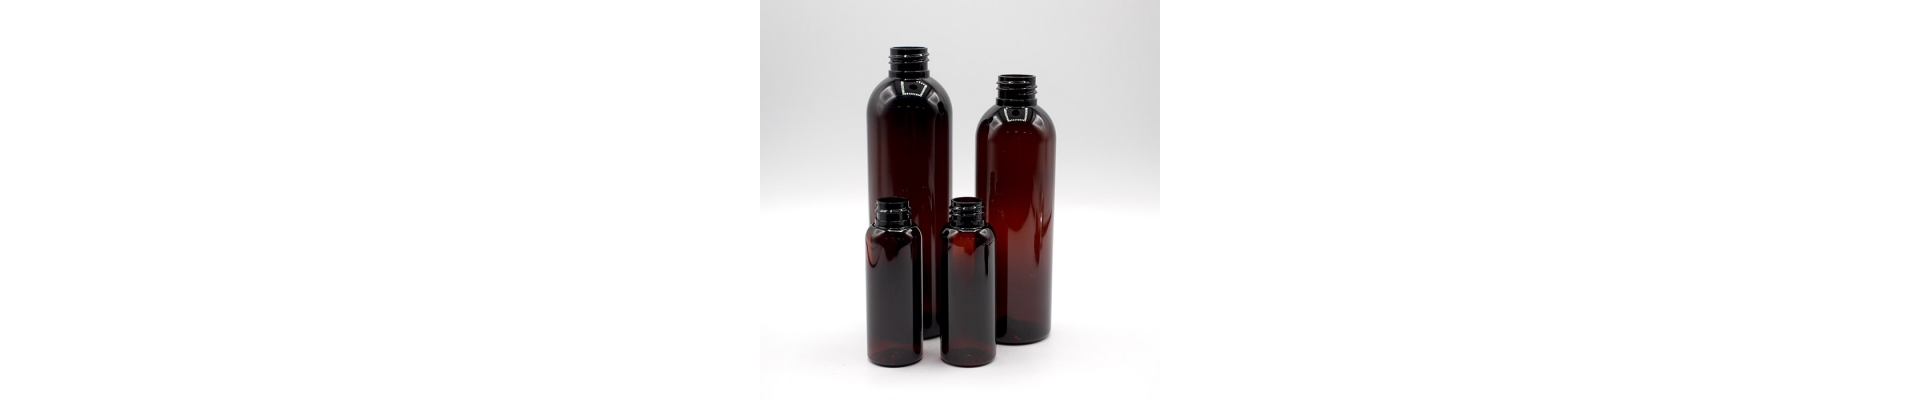 Amber PET Tall Boston Bottles & Closures - PET Bottles, Jars & Closures - Containers & Packaging - Shop